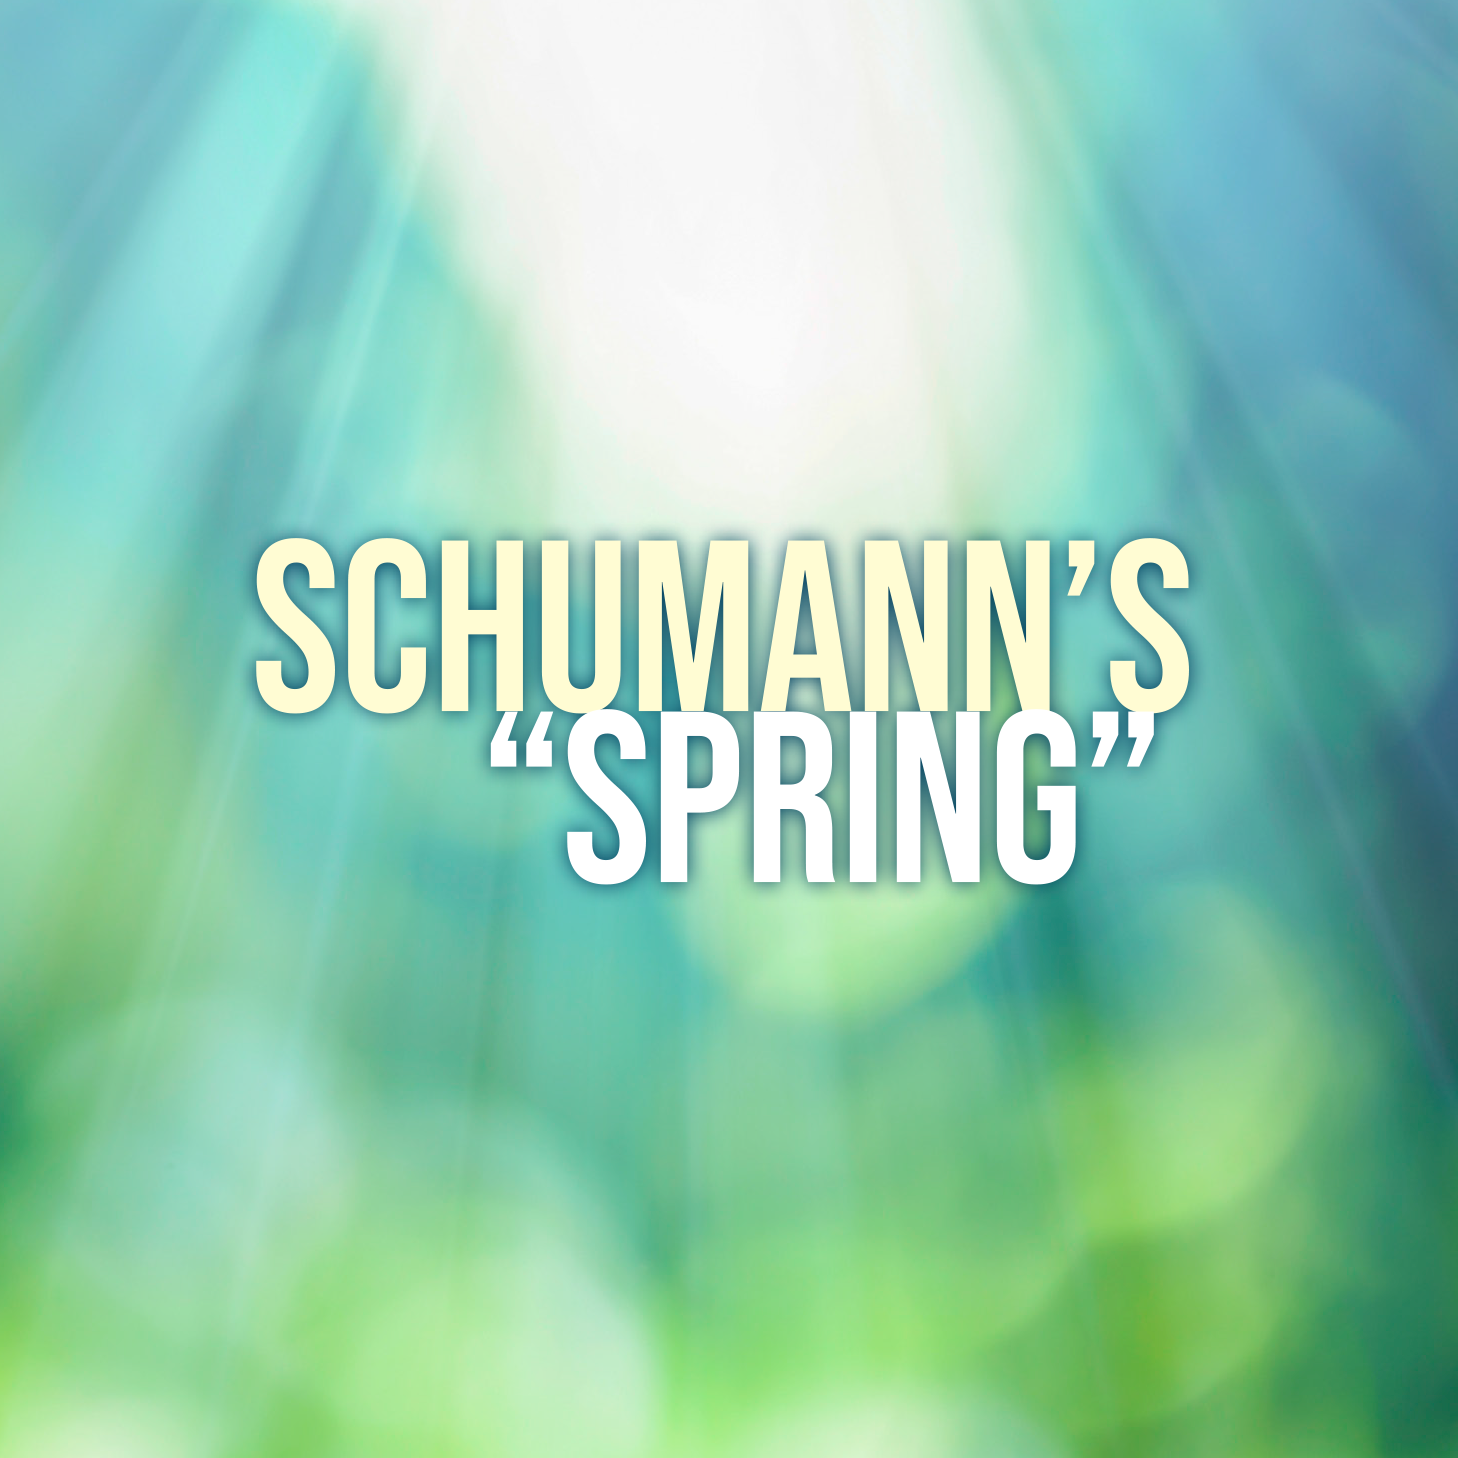 Image for Schumann’s “Spring”